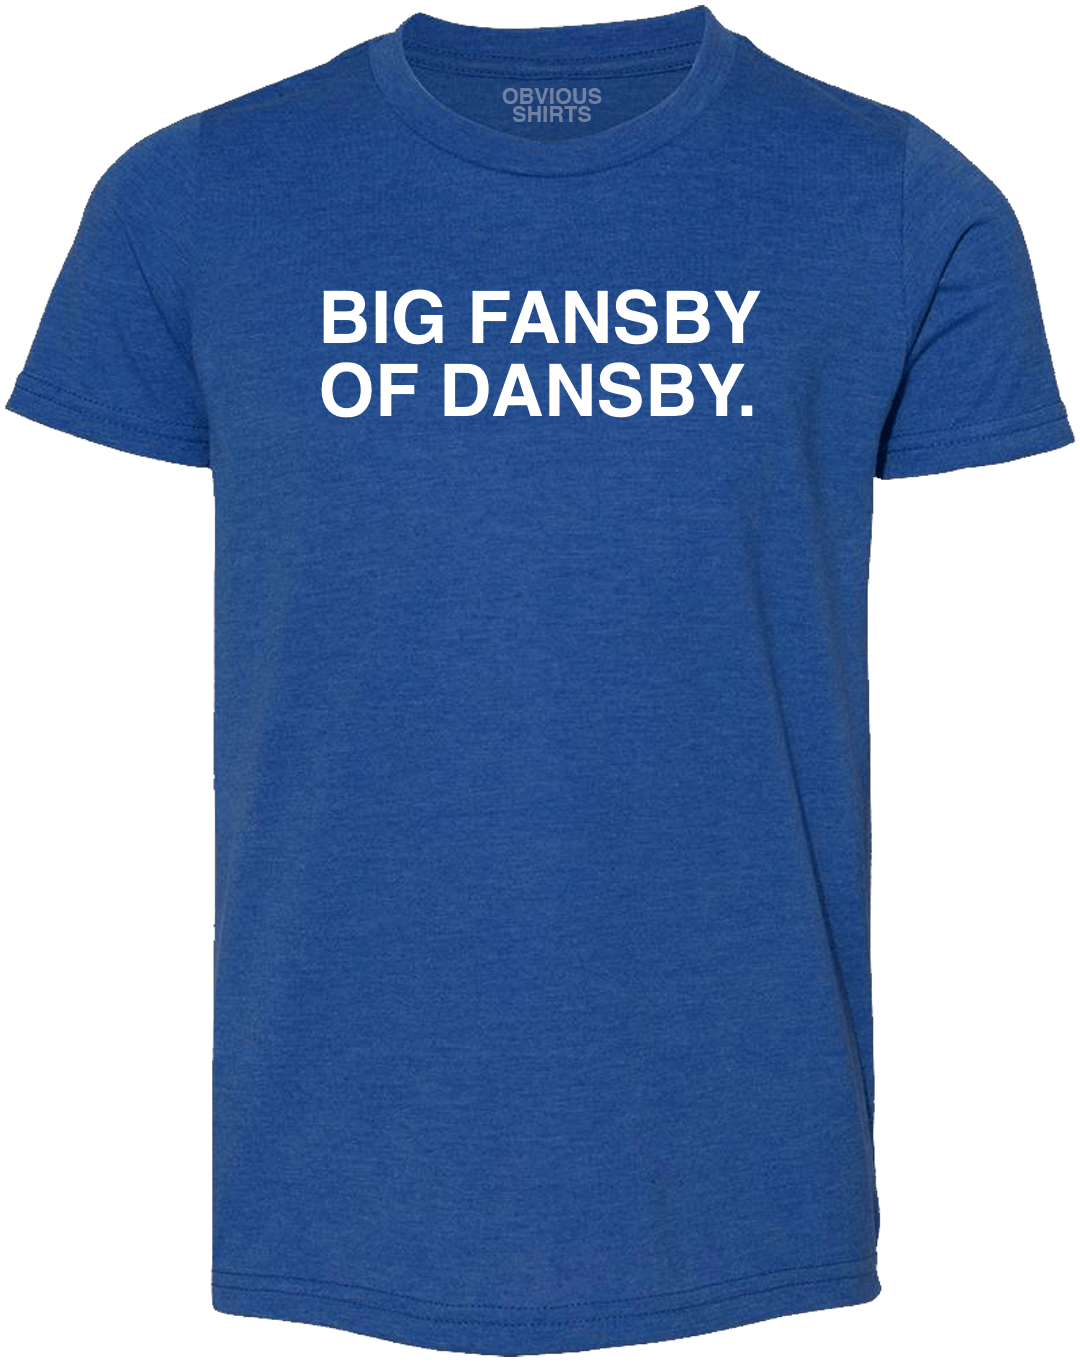 BIG FANSBY OF DANSBY. (YOUTH) - OBVIOUS SHIRTS